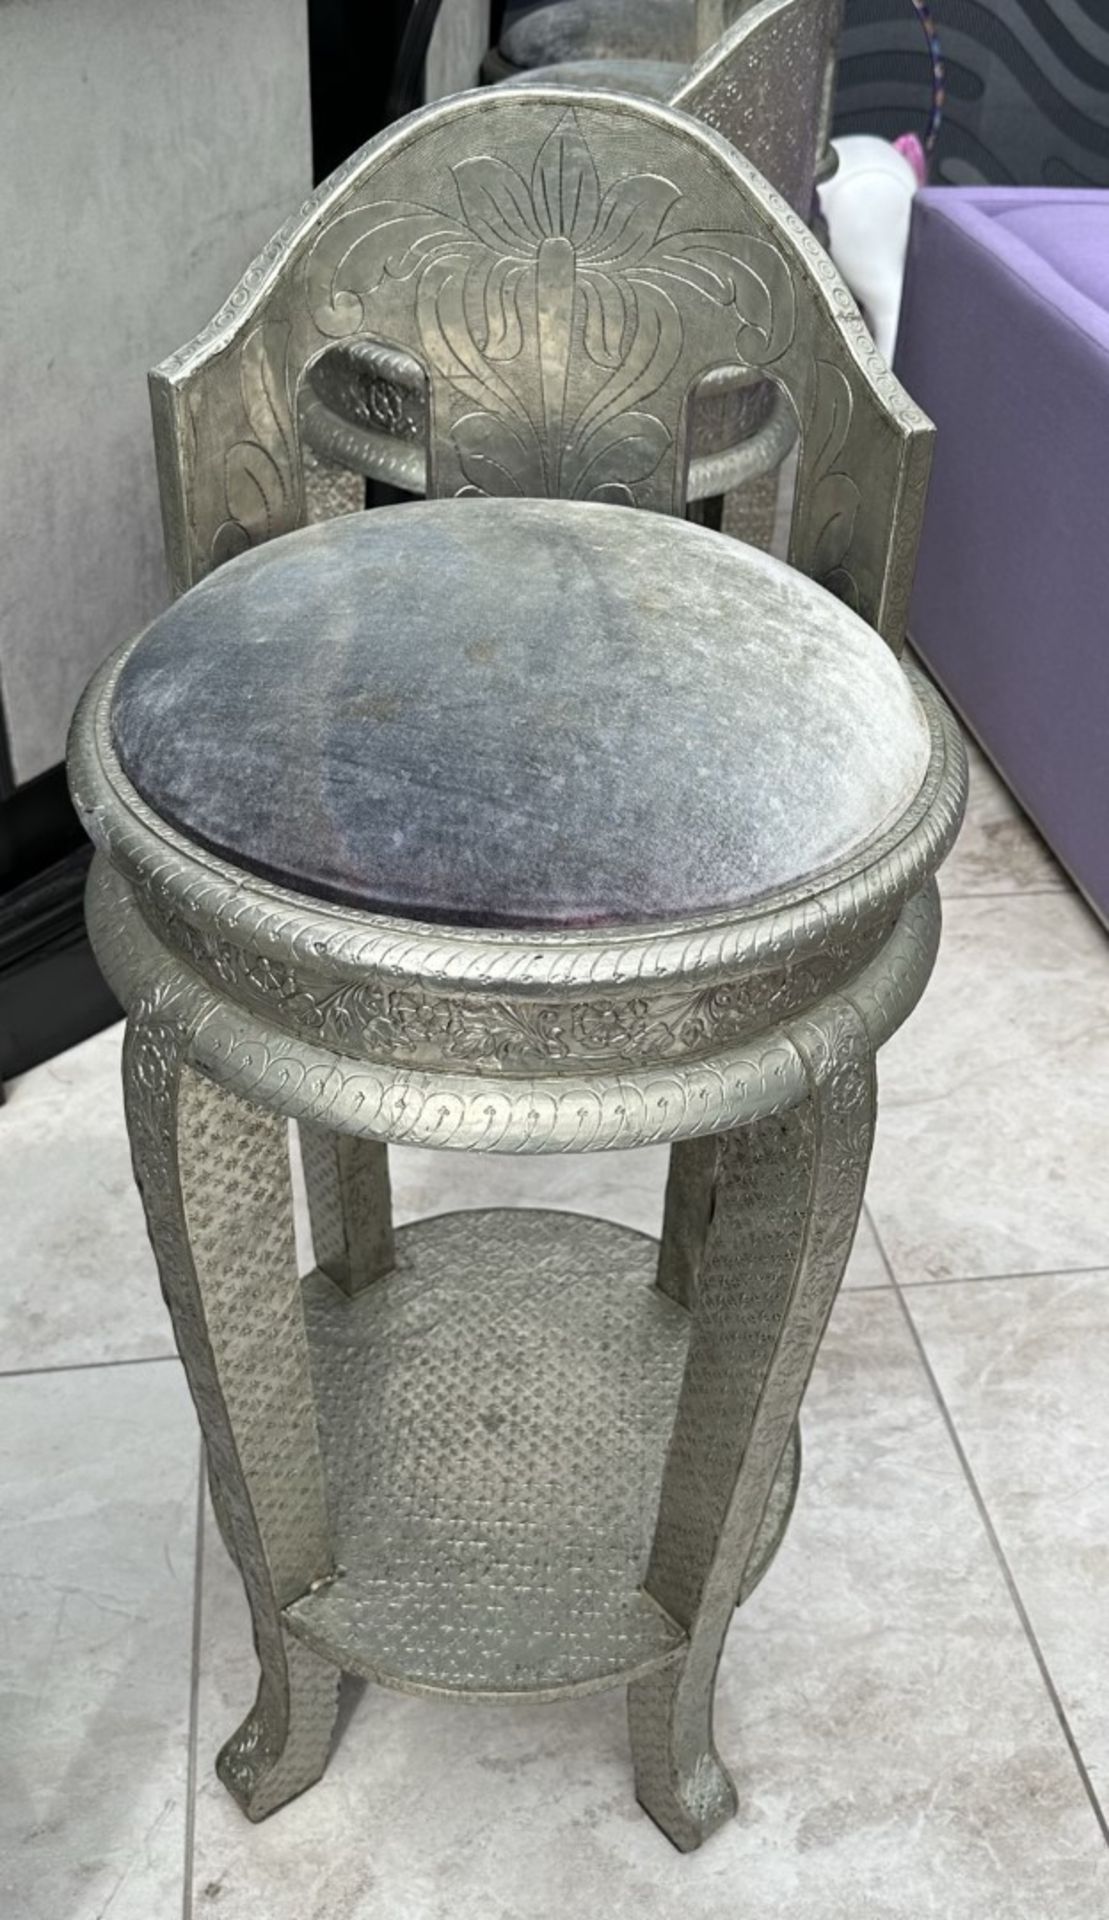 6 x Ornate Silver Tone Bar Stools With Grey Velvet Seat Pads - Image 8 of 16